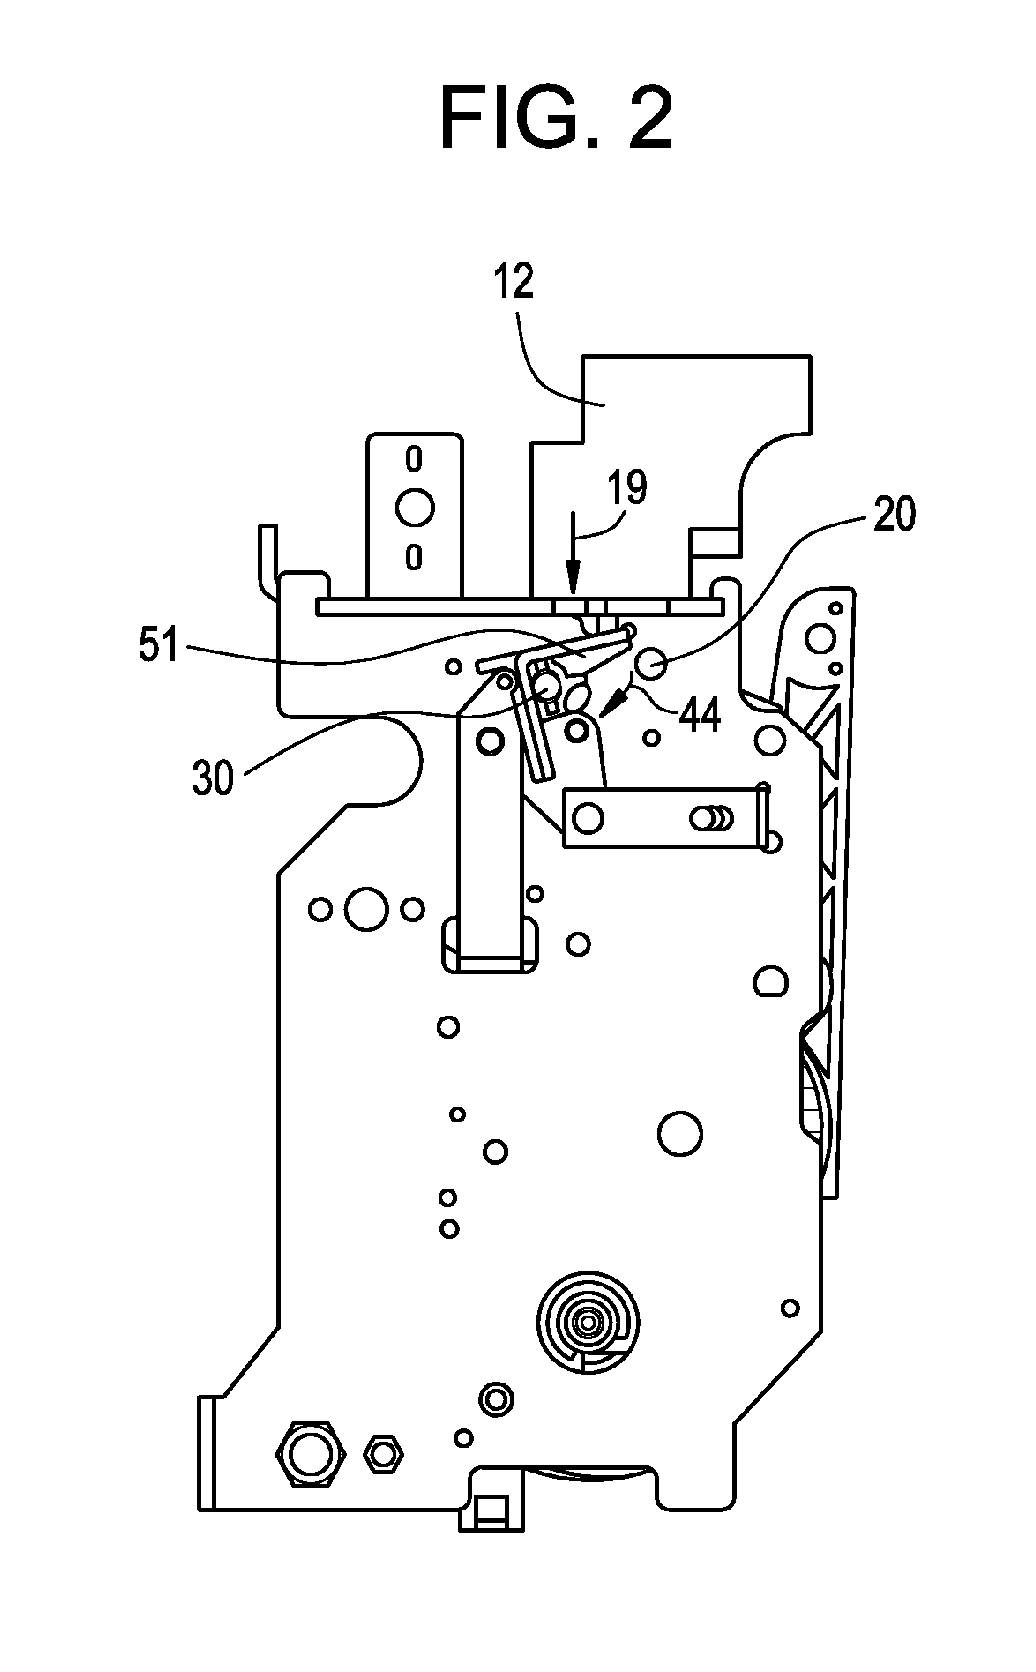 Accessories for a rotatable latching shaft of a circuit breaker